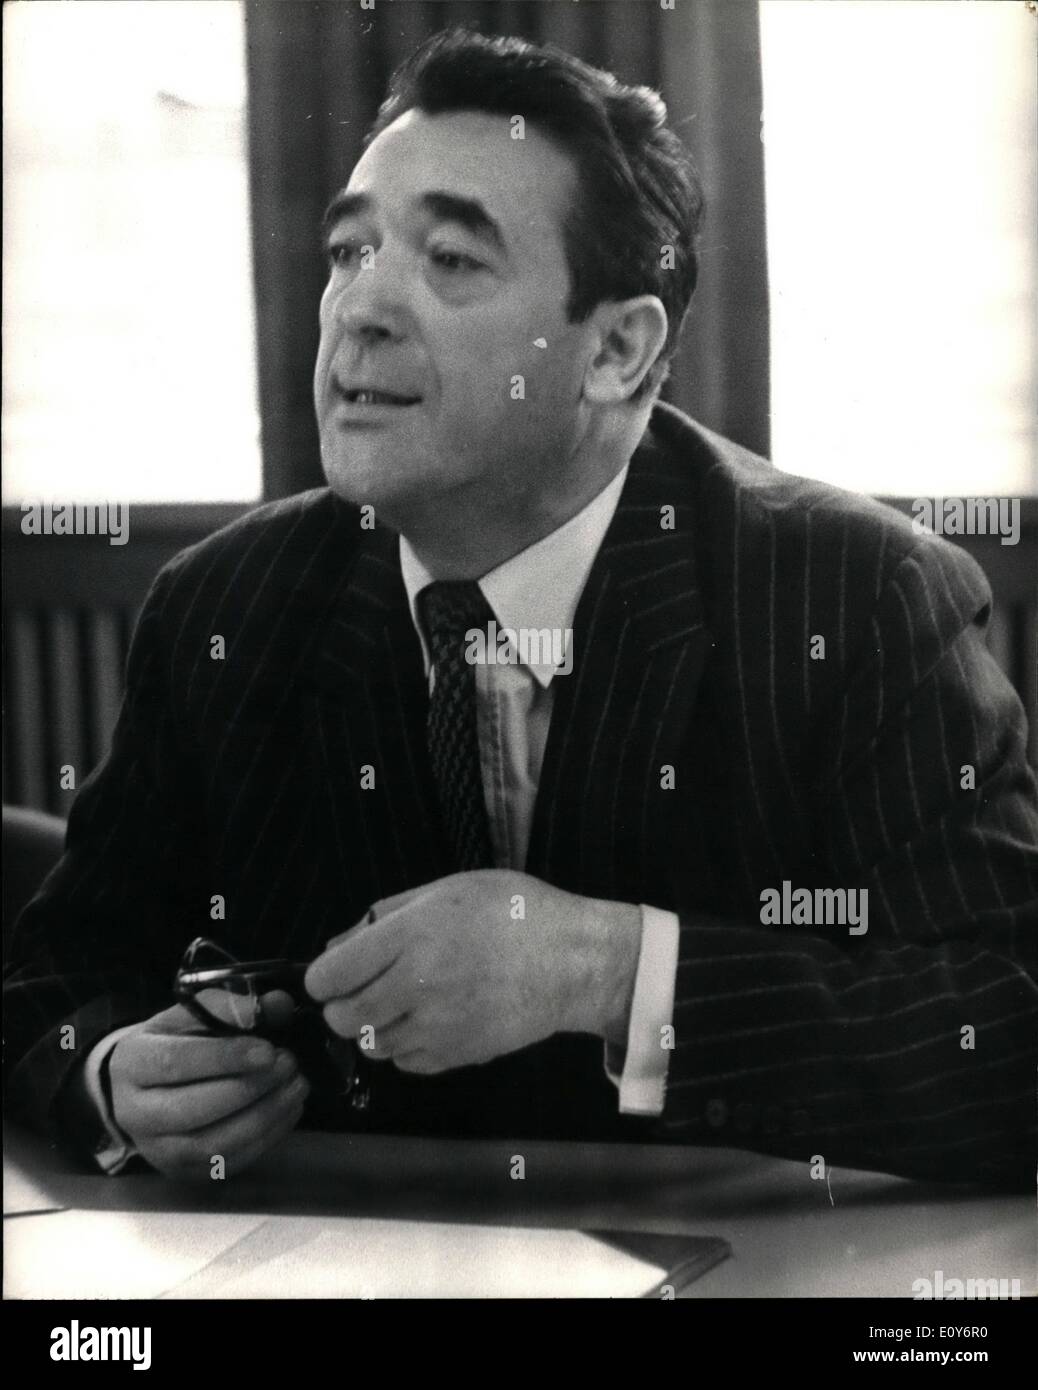 Dec. 12, 1968 - Mr. Robert Maxwell holds press conference: Mr.Robert Maxwell, whose offer to News of the world shareholders closes at 3 p.m. today held a press conference, at Hill Samuel, Wood Street, E.C.2. Photo shows Mr. Robert Maxwell seen speaking at today's Press Conference. Stock Photo